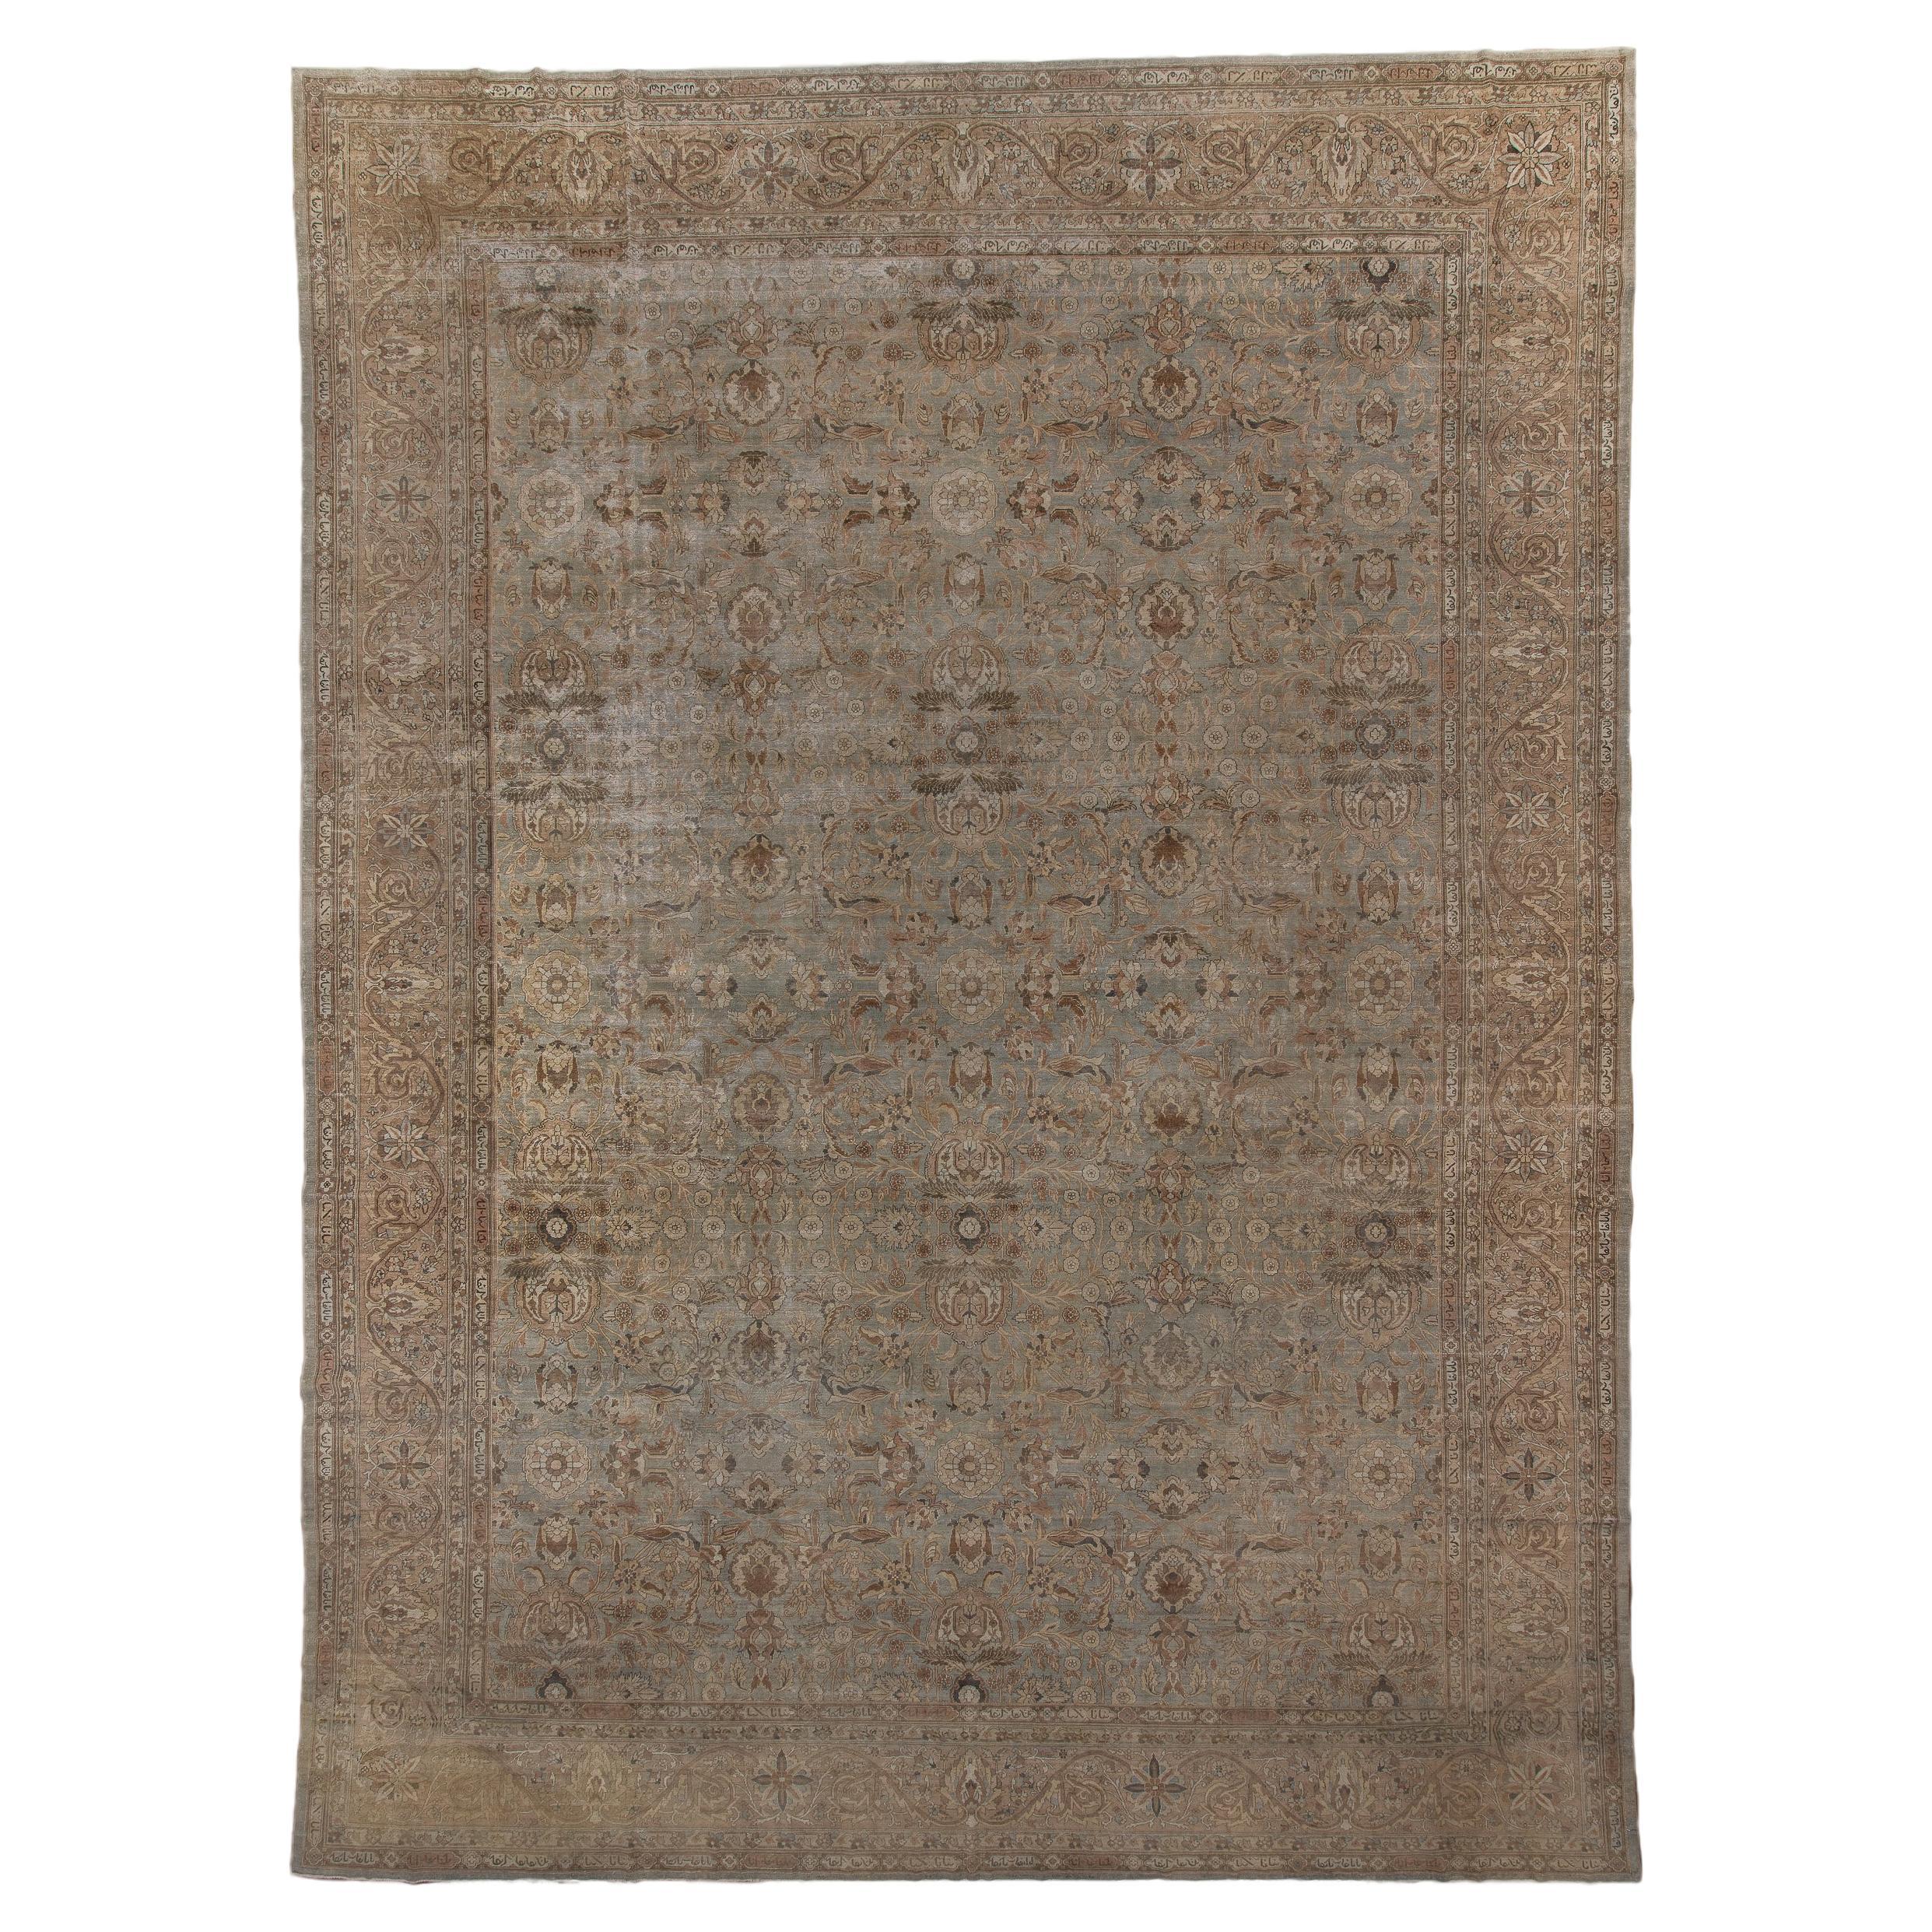 Antique Tabriz Rug with Light Field and All Over Palmette Designs  For Sale